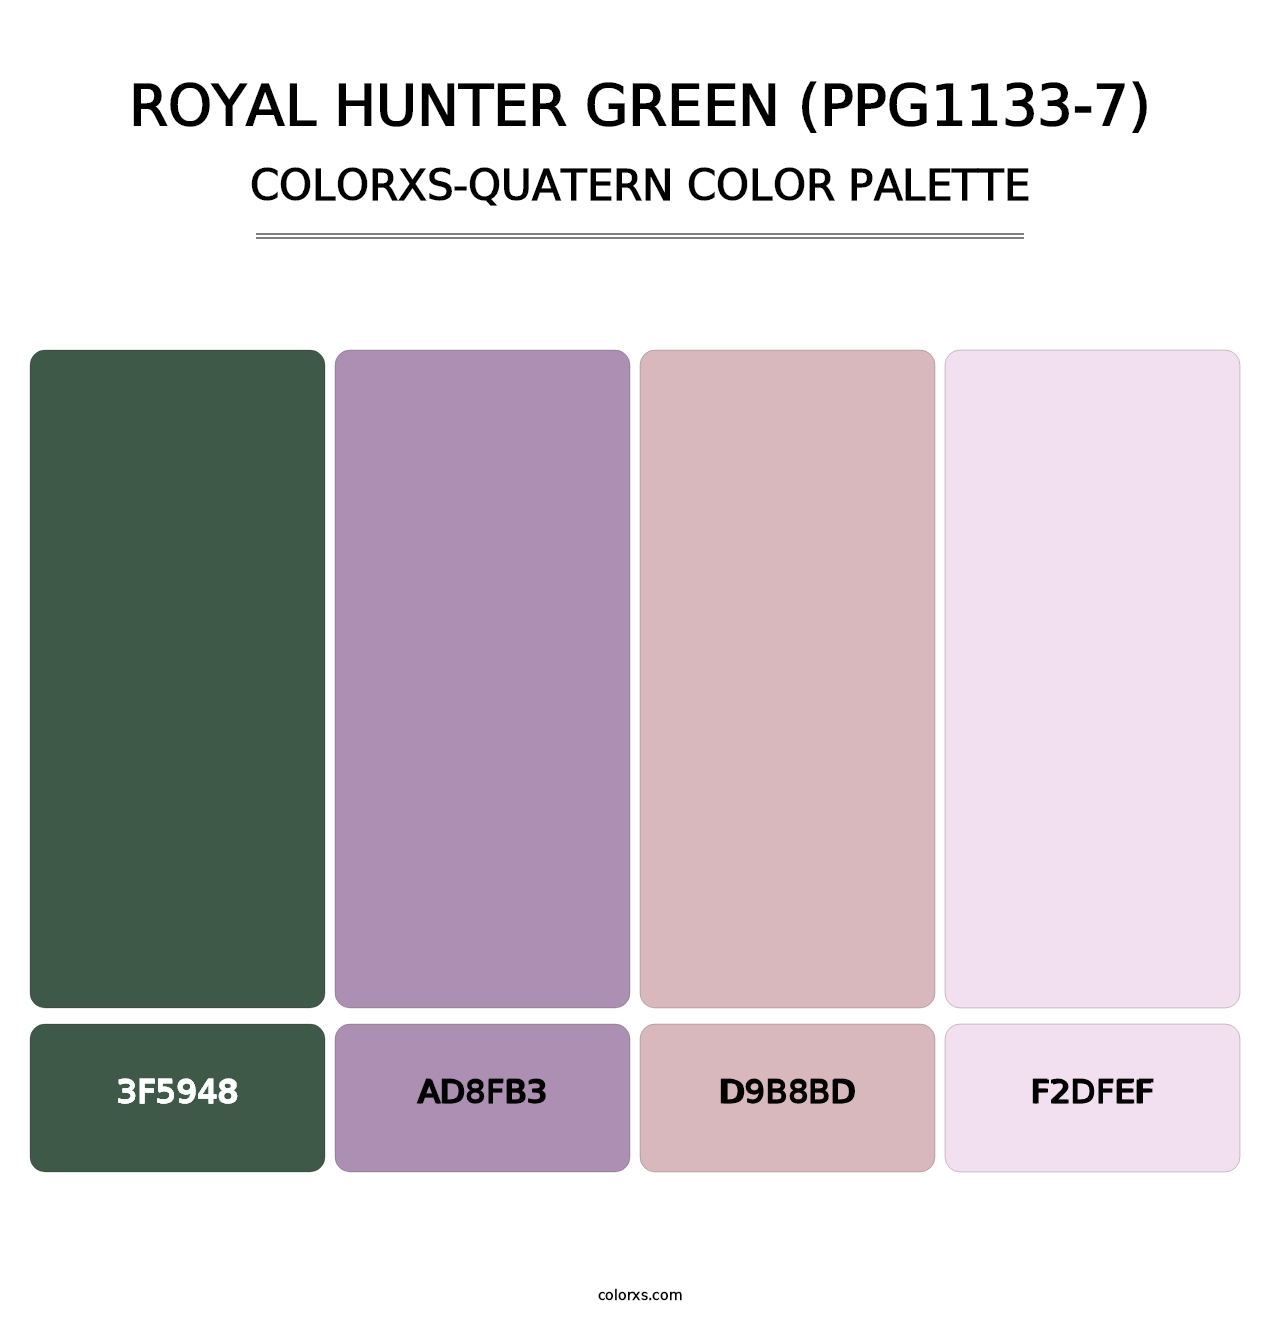 Royal Hunter Green (PPG1133-7) - Colorxs Quatern Palette